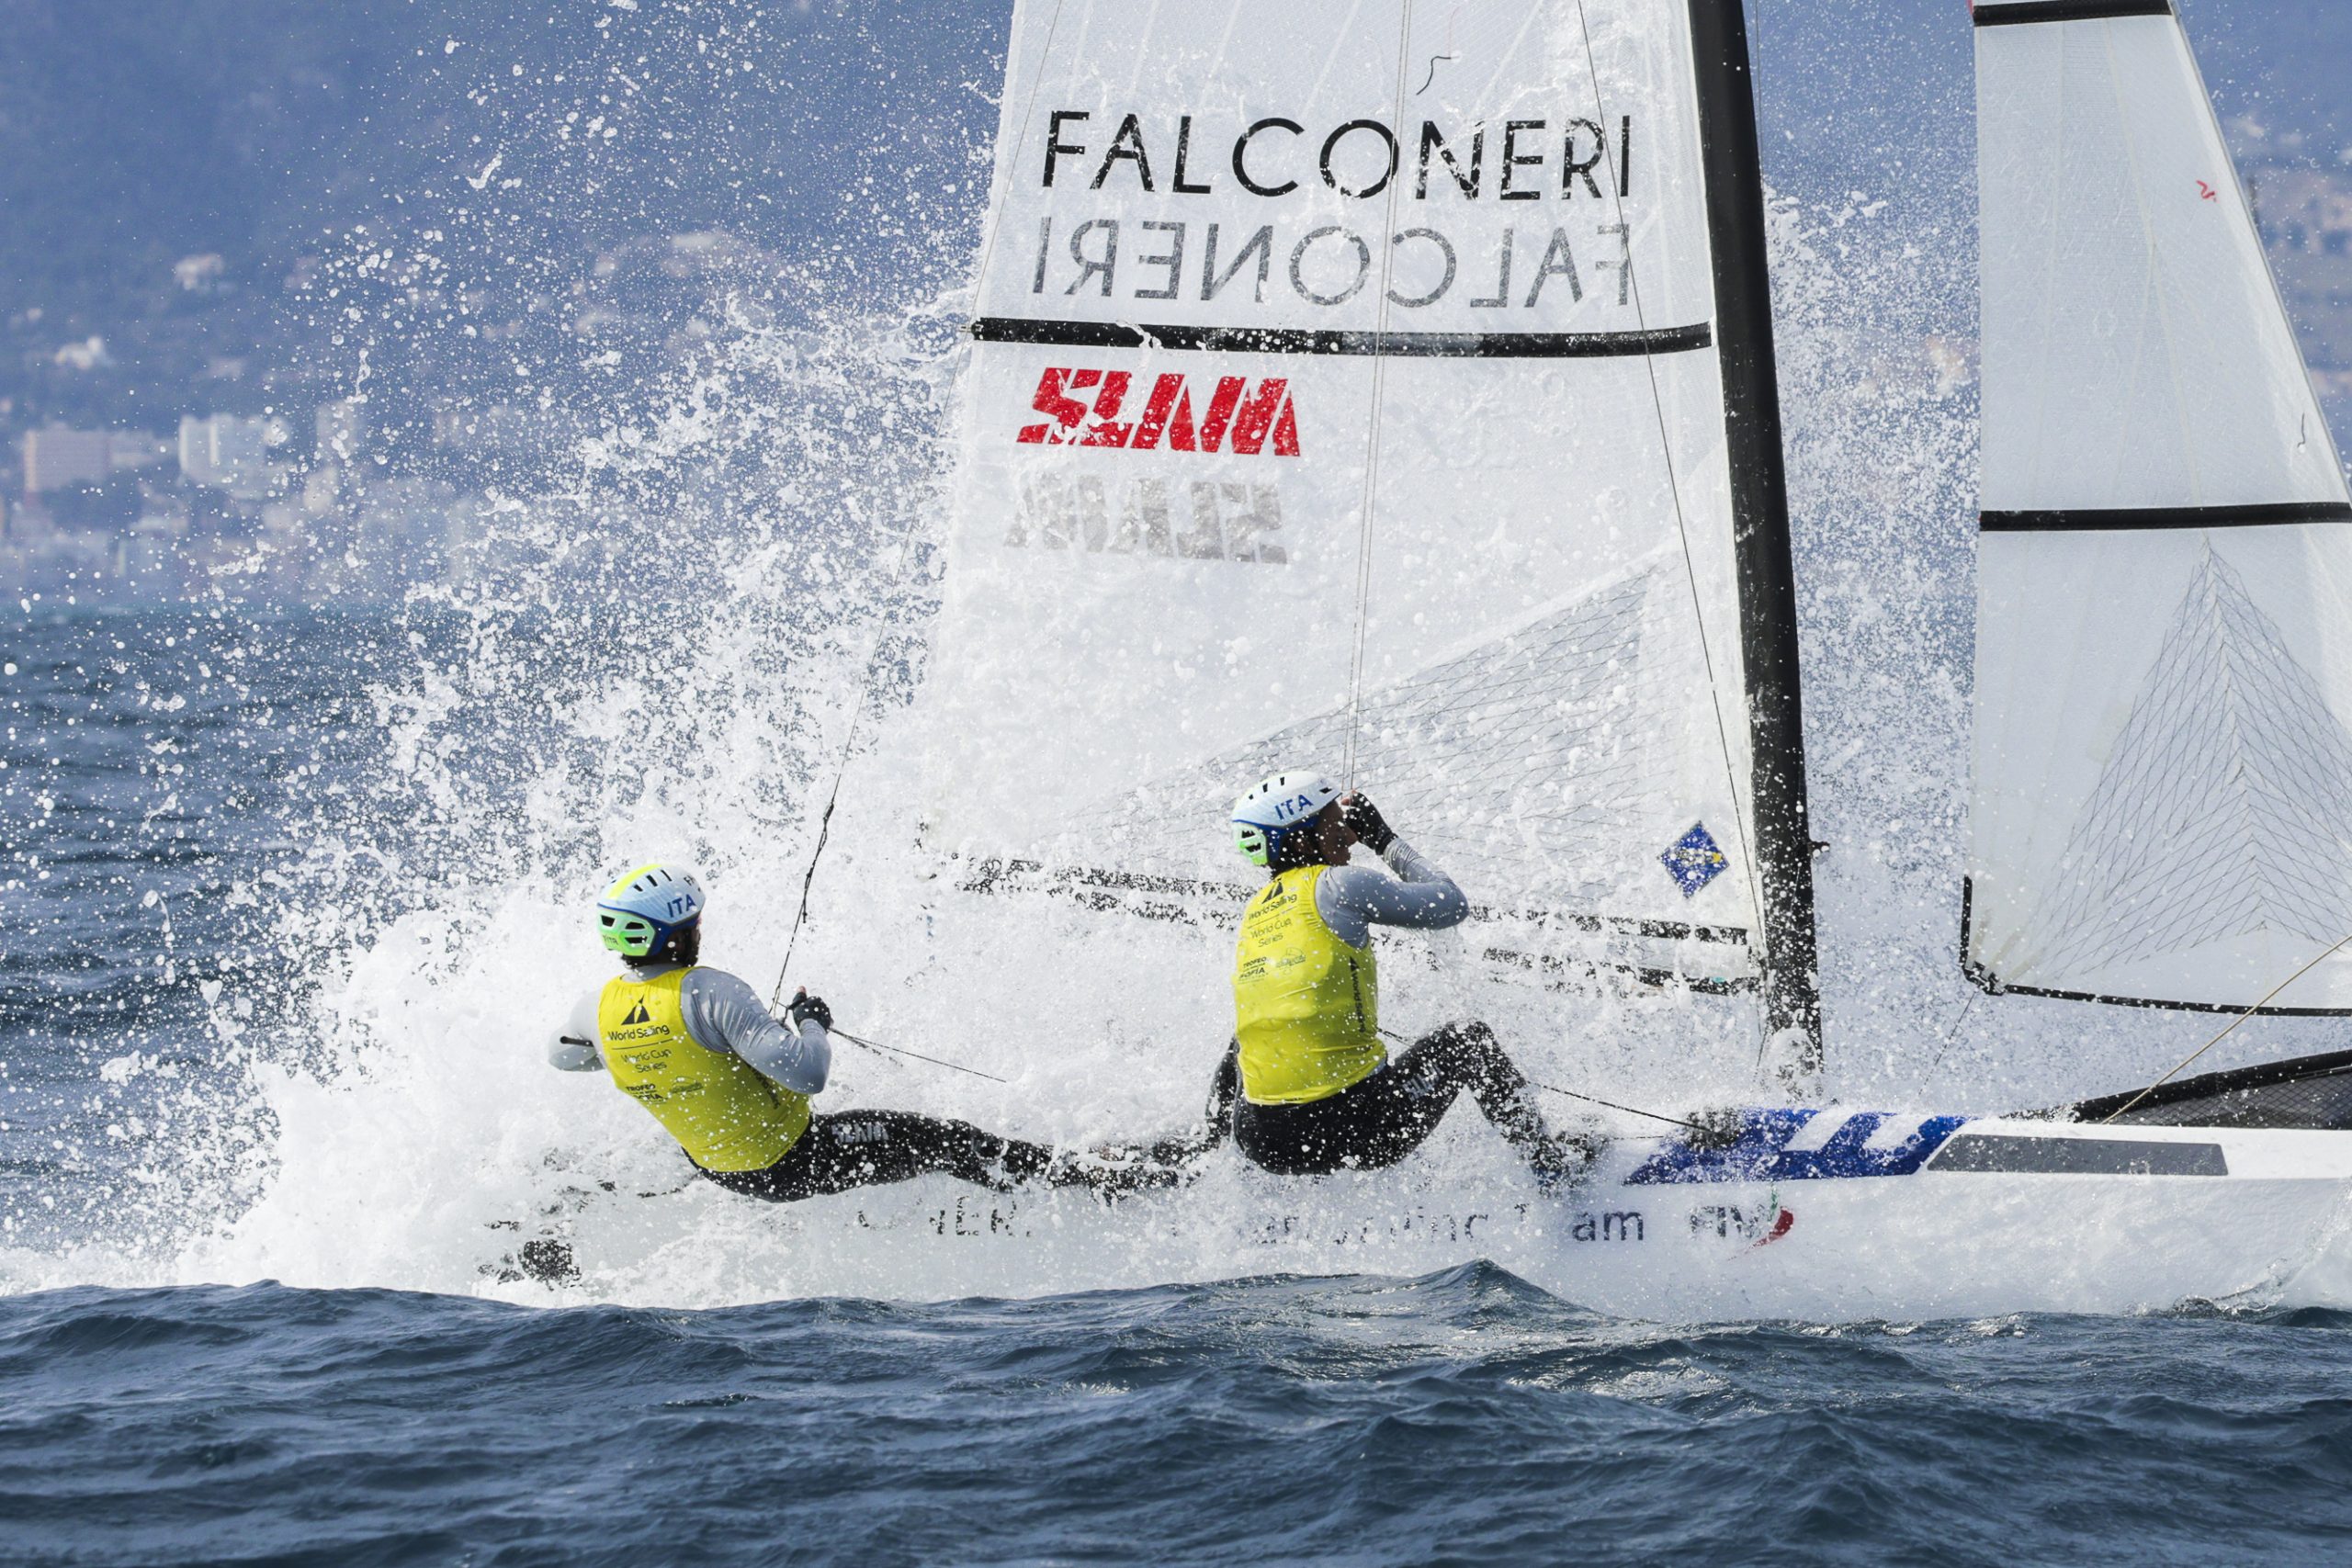 Italian Olympic Nacra 17 champions Tita and Banti win their 53 Trofeo Princesa Sofía title with a day to spare.